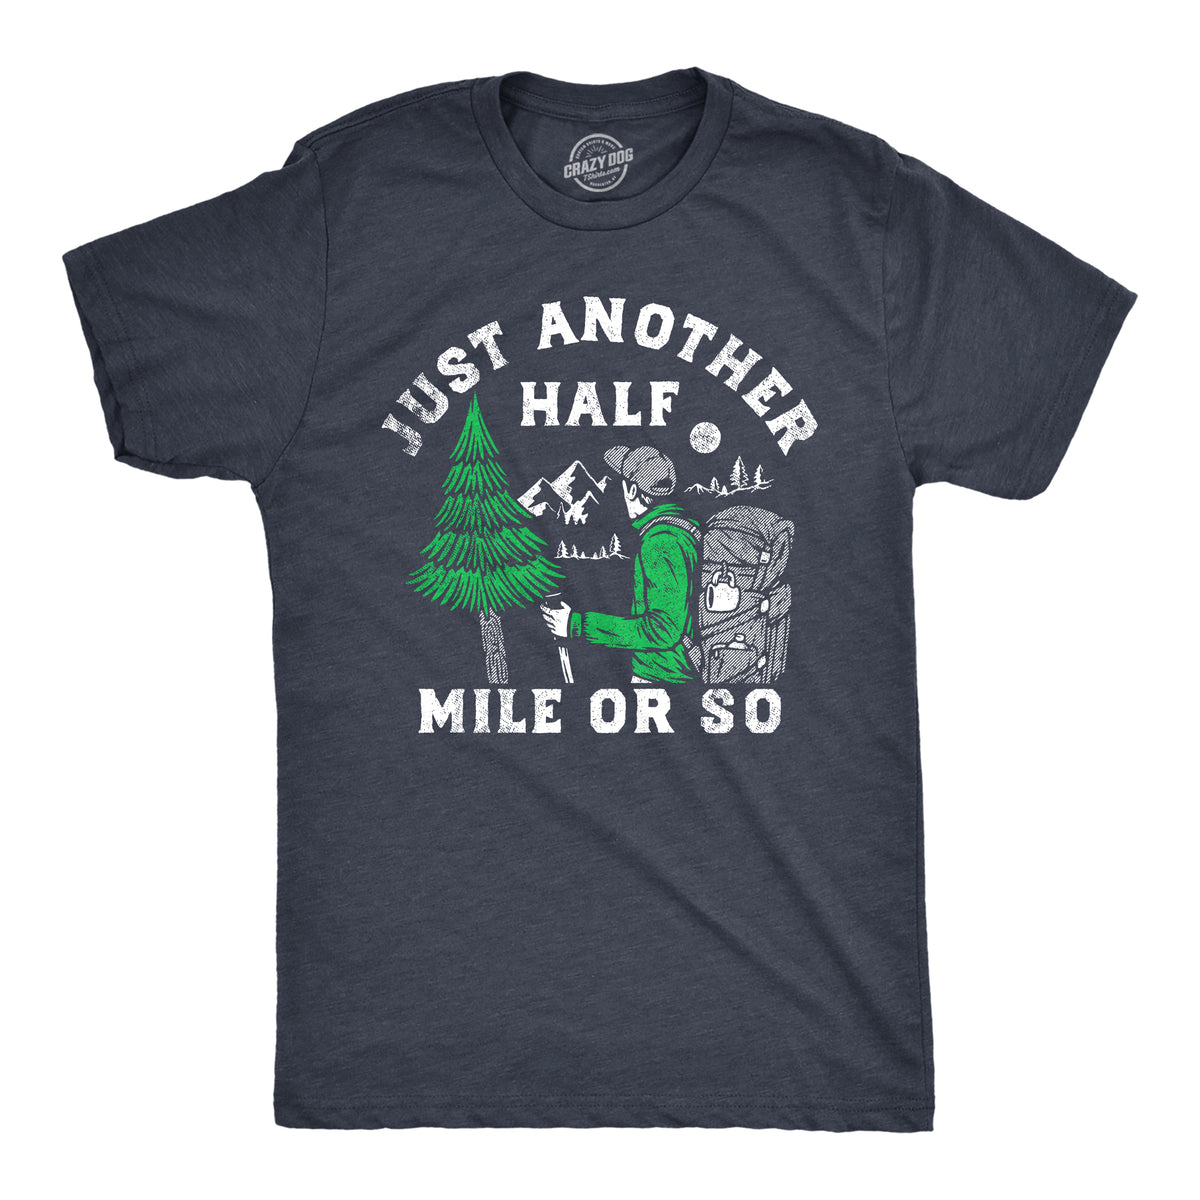 Funny Heather Navy - Another Half Mile Just Another Half Mile Or So Mens T Shirt Nerdy sarcastic Tee